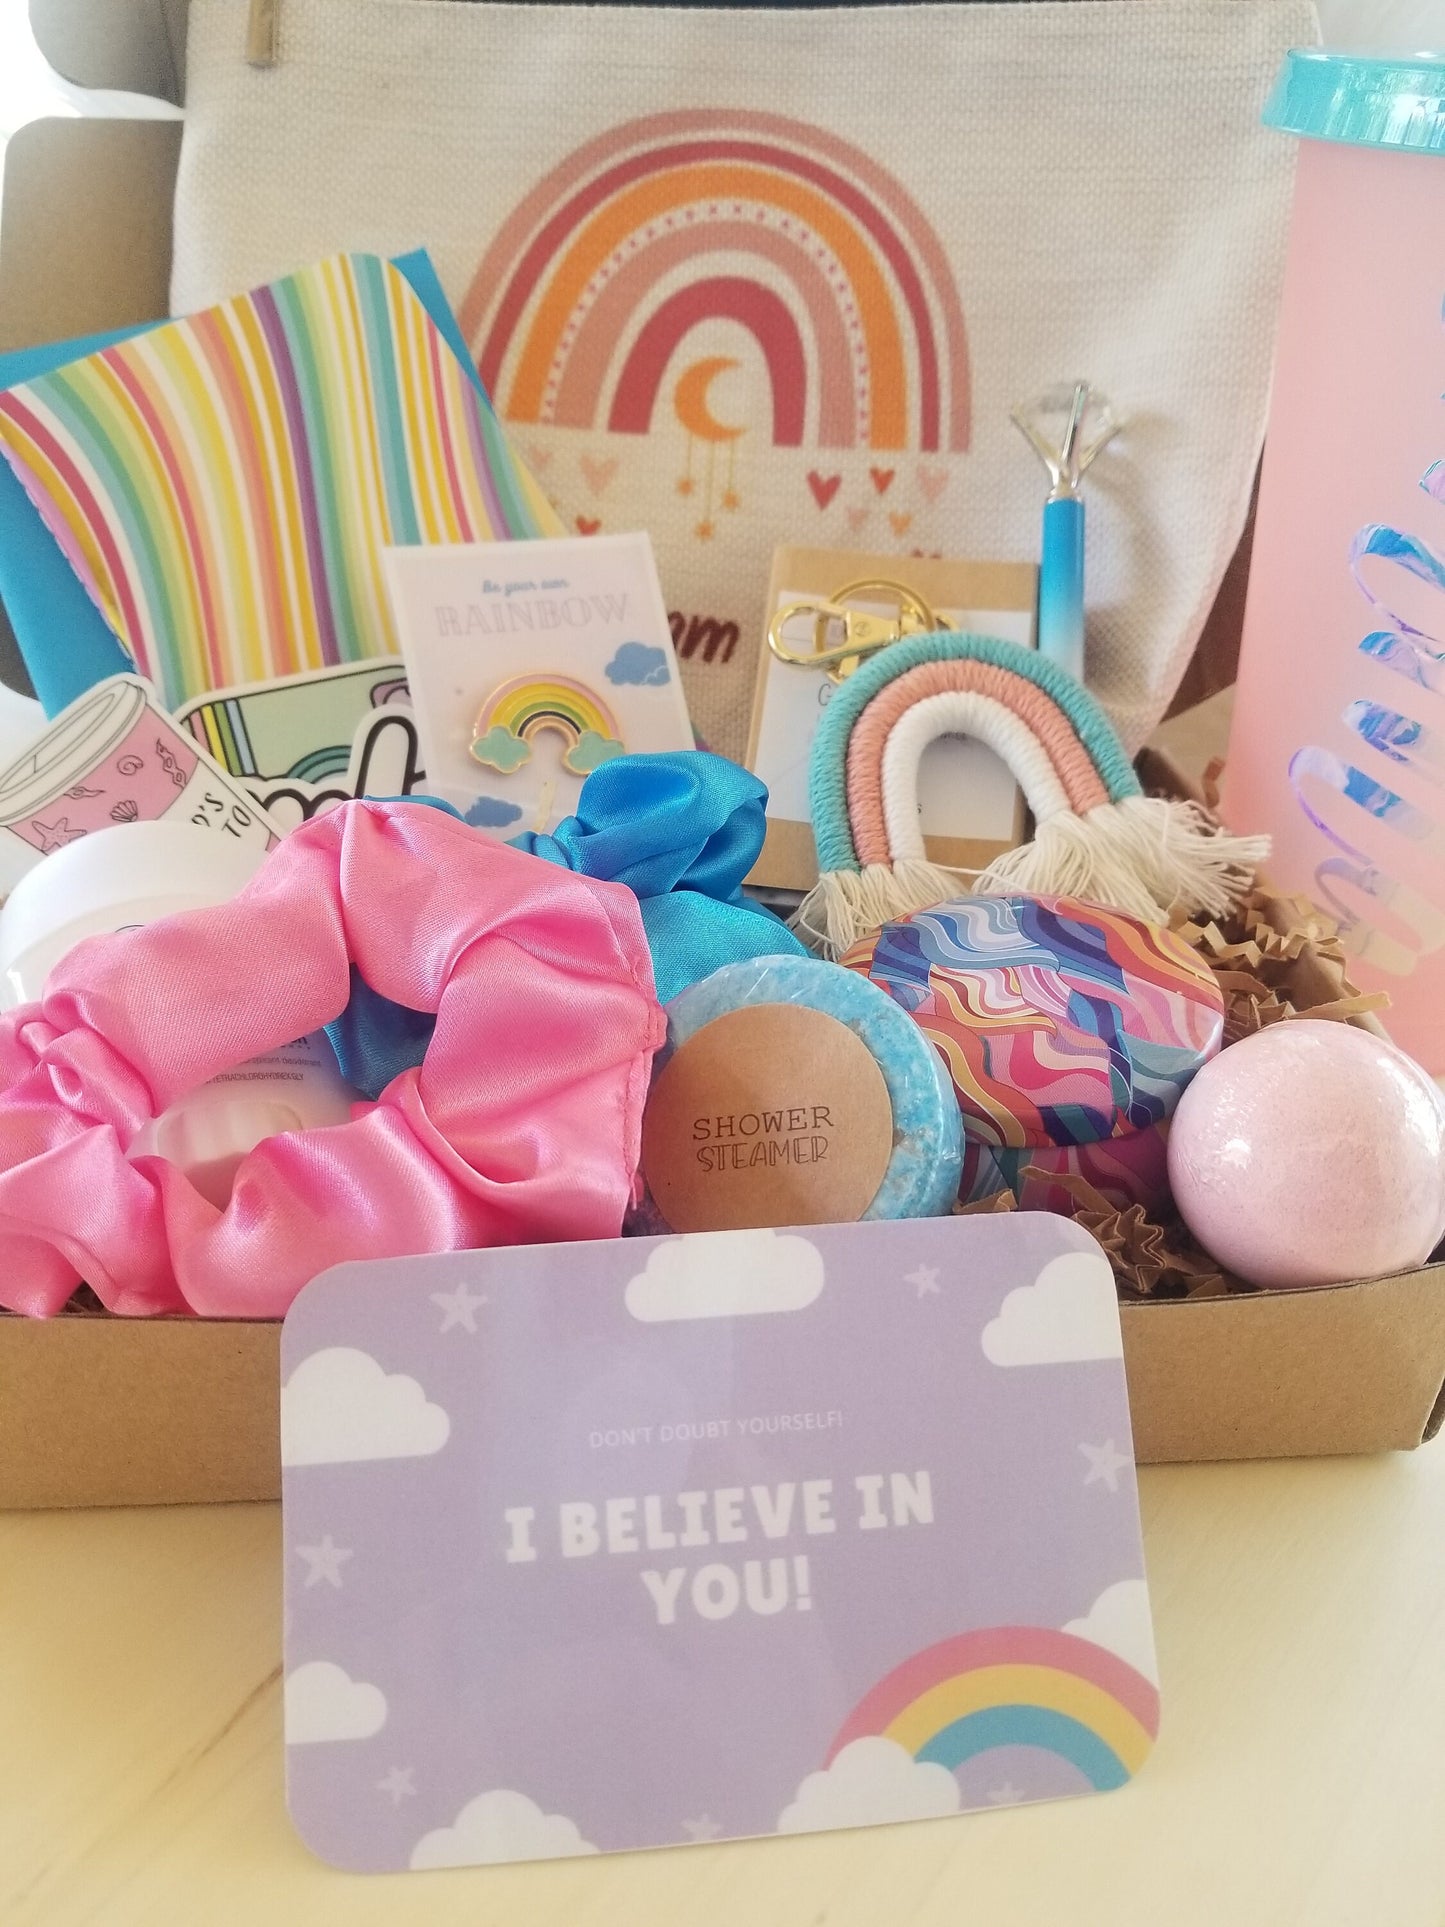 Dream big gift box for Teen/tween girl, personalized care package set